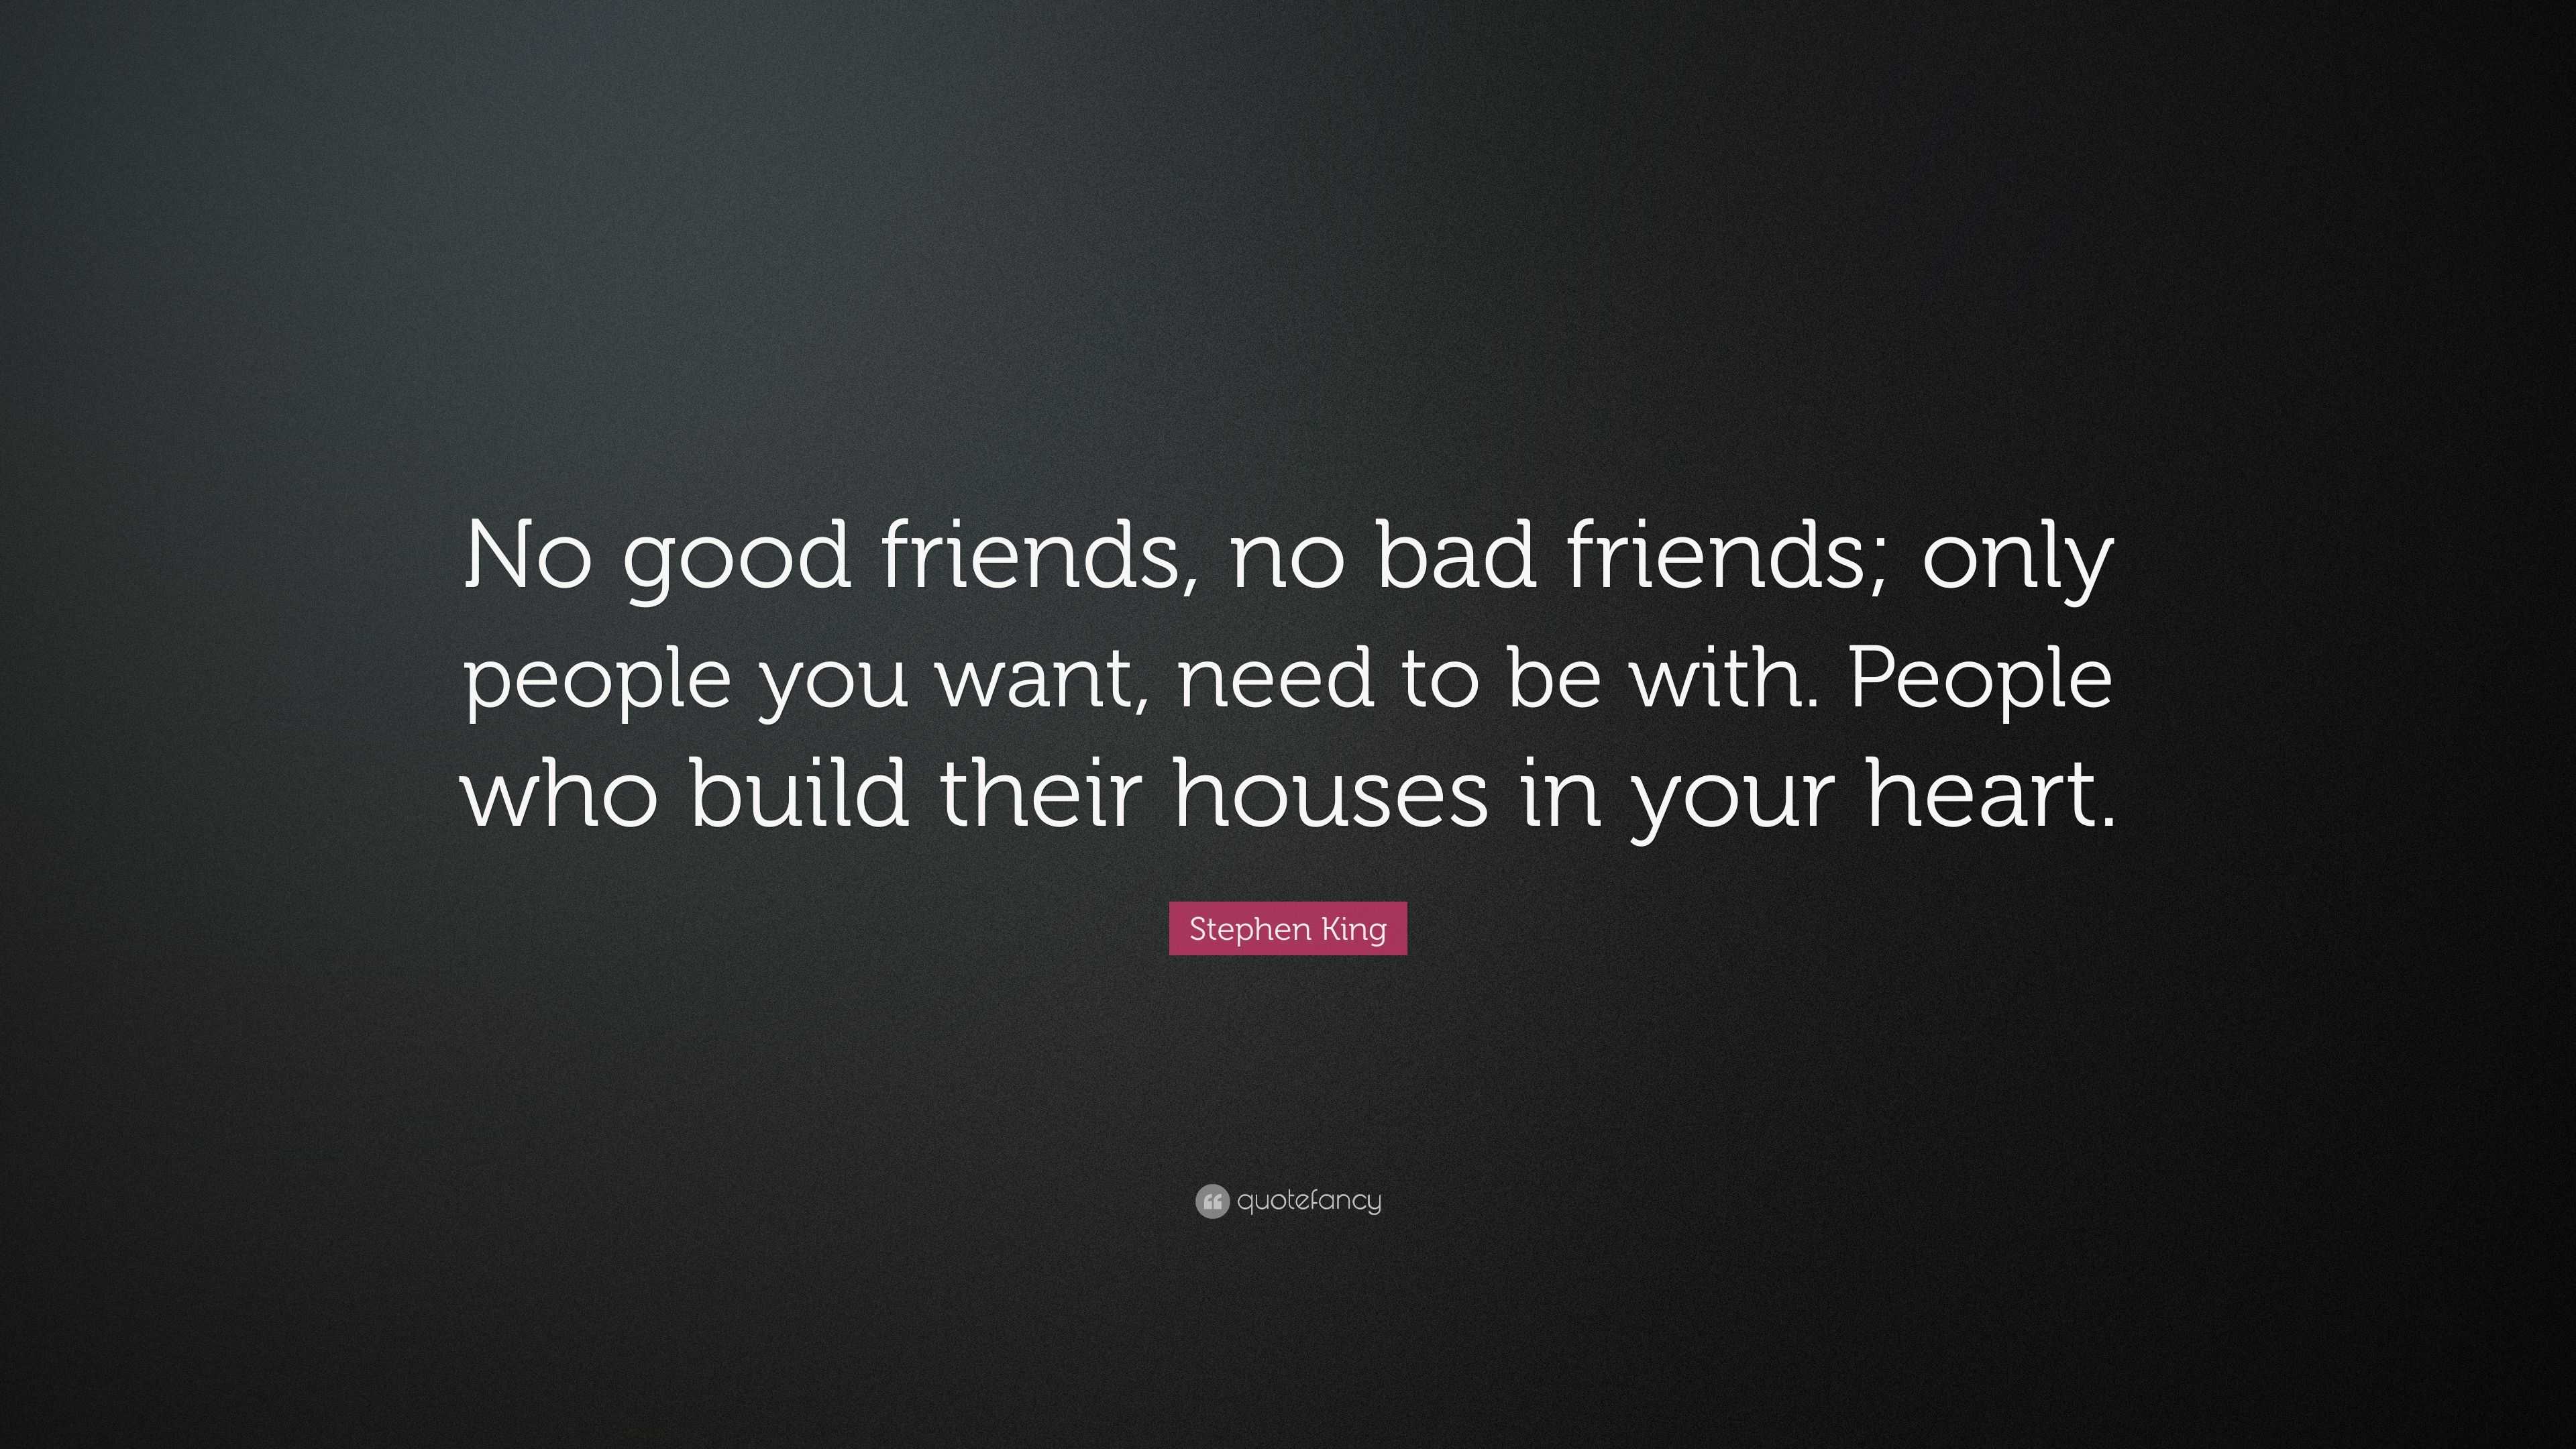 Stephen King Quote: “No good friends, no bad friends; only people you ...